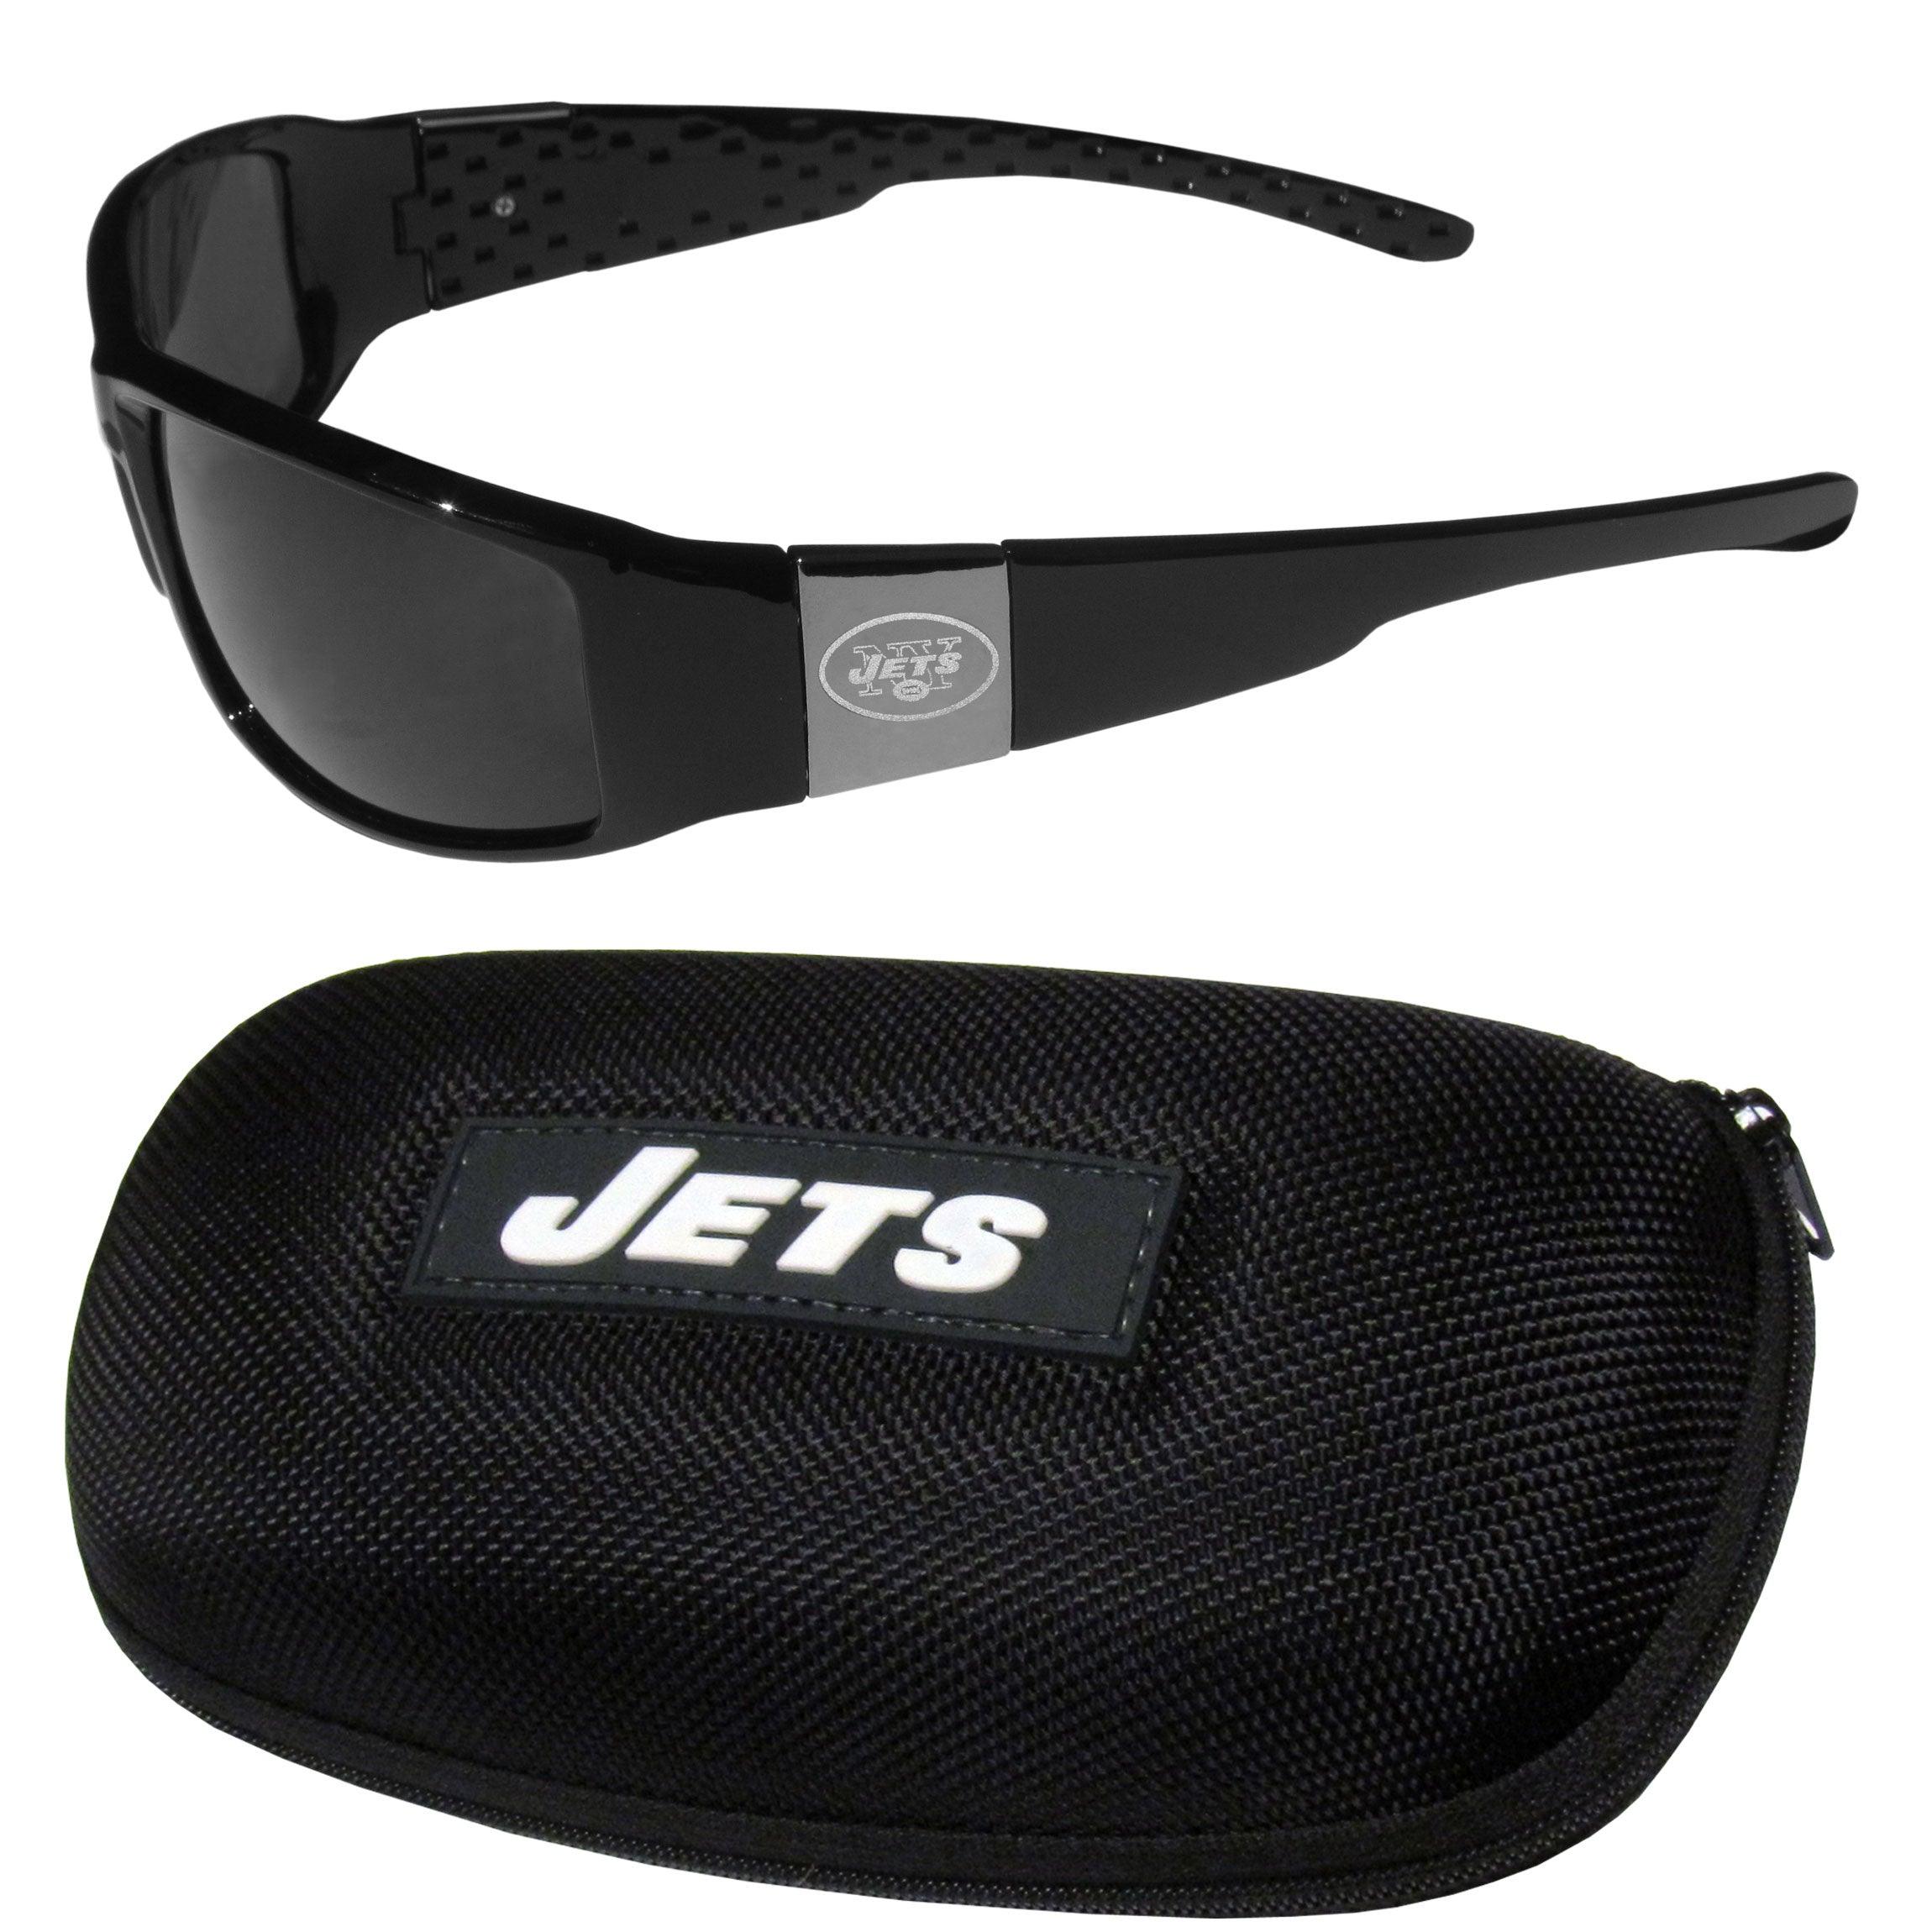 New York Jets Chrome Wrap Sunglasses and Zippered Carrying Case - Flyclothing LLC